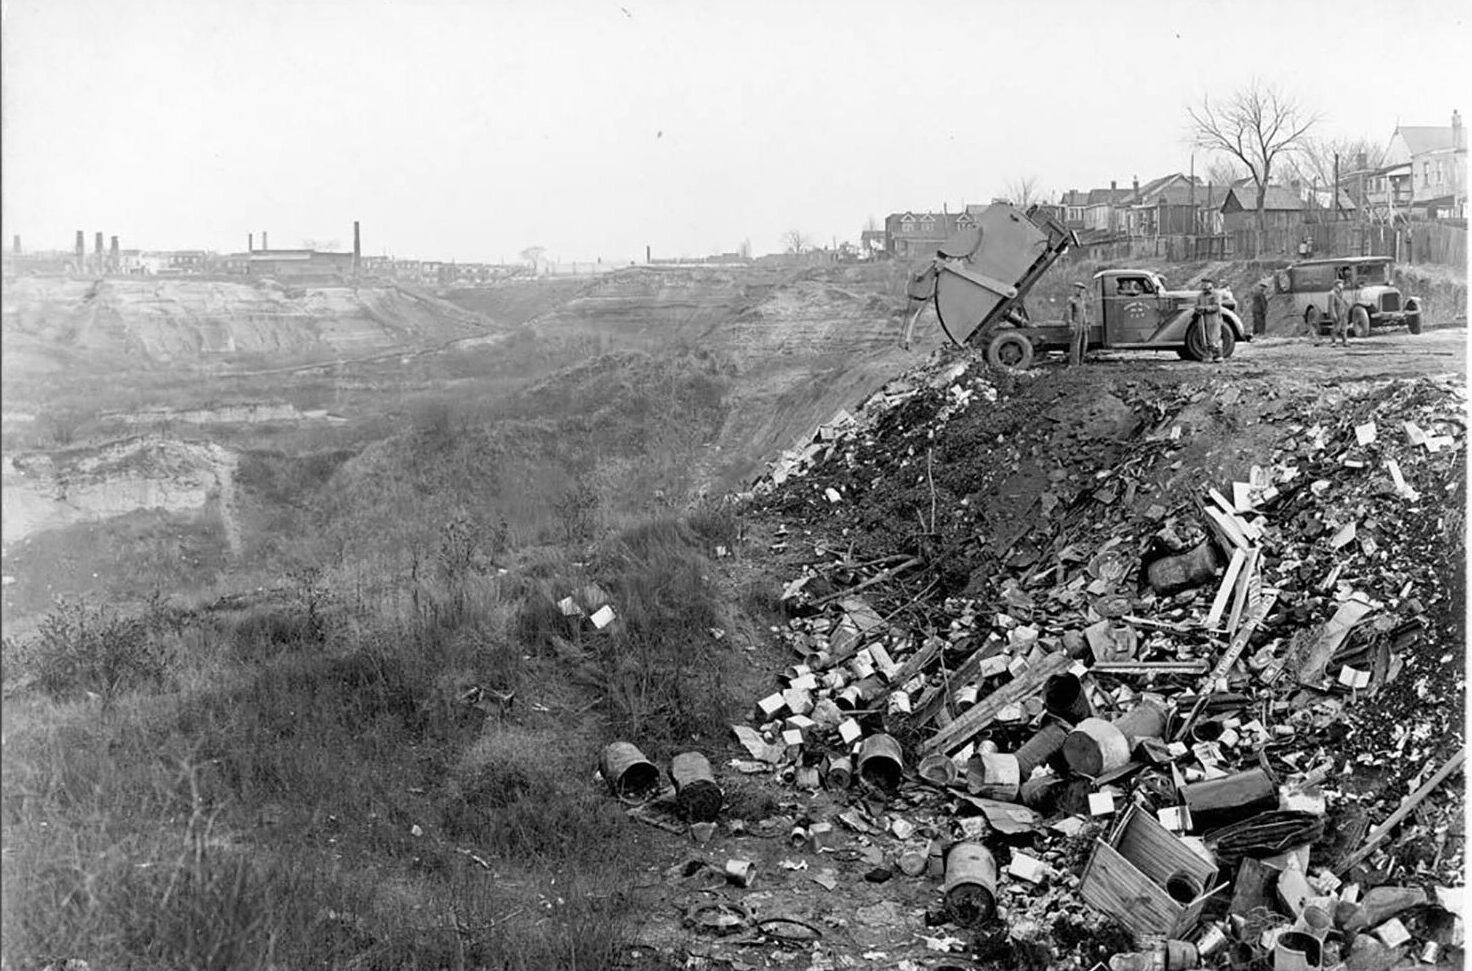 A black and white image of a dumpsite with trucks dumping waste (mainly bricks and buckets) into the pile of garbage.